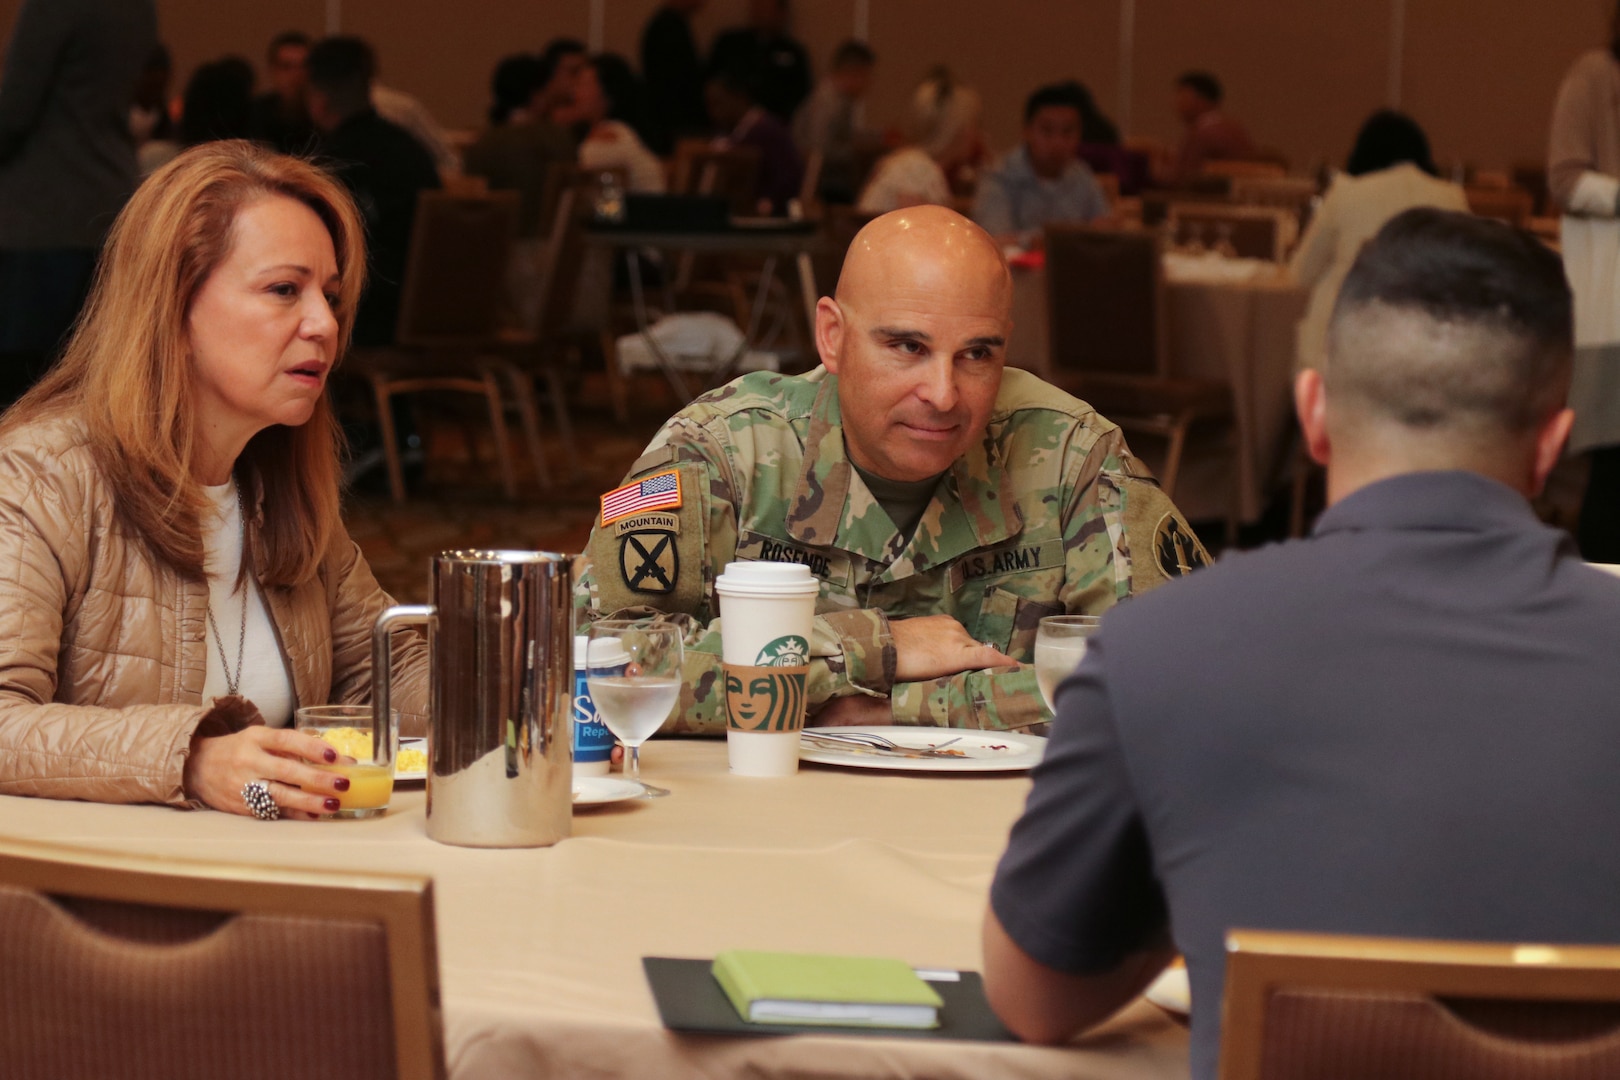 Maj. Gen. Alberto Rosende, commanding general of the 63rd Readiness Division, and his wife, Martha, talk to an Army Reserve Soldier and his spouse at a Yellow Ribbon event in Anaheim, California, Nov. 16, 2019.